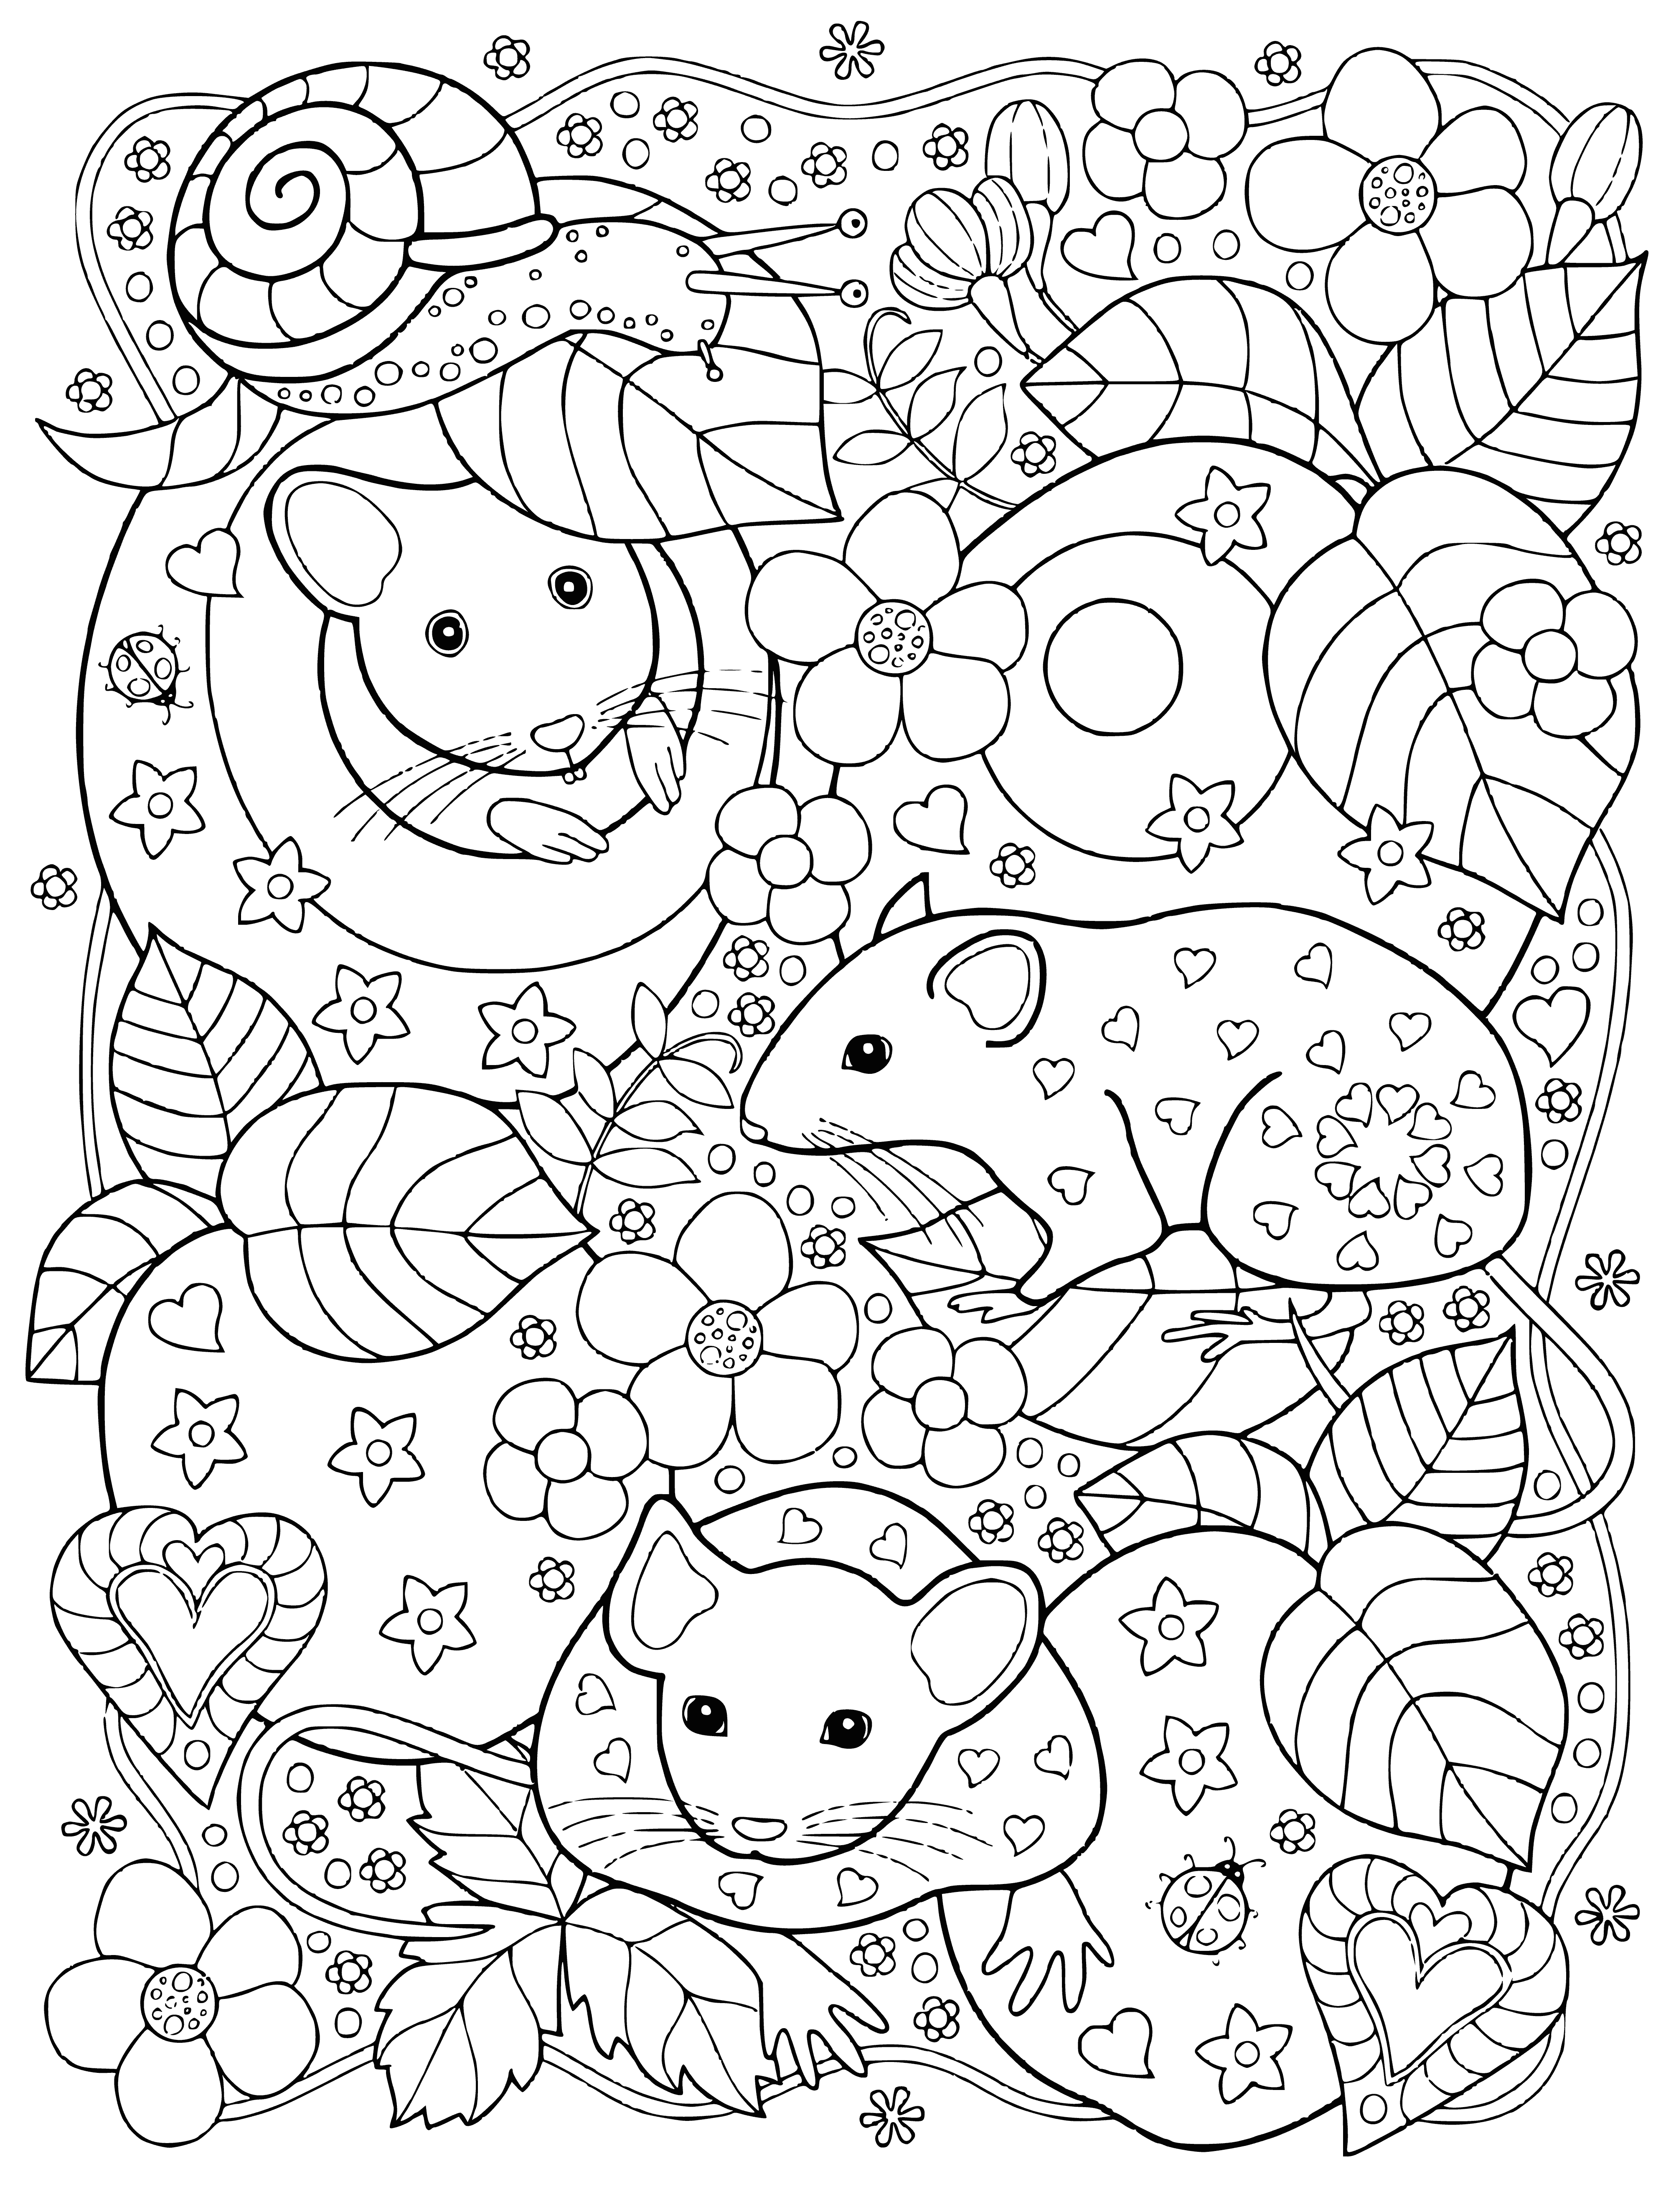 Mice in the garden coloring page